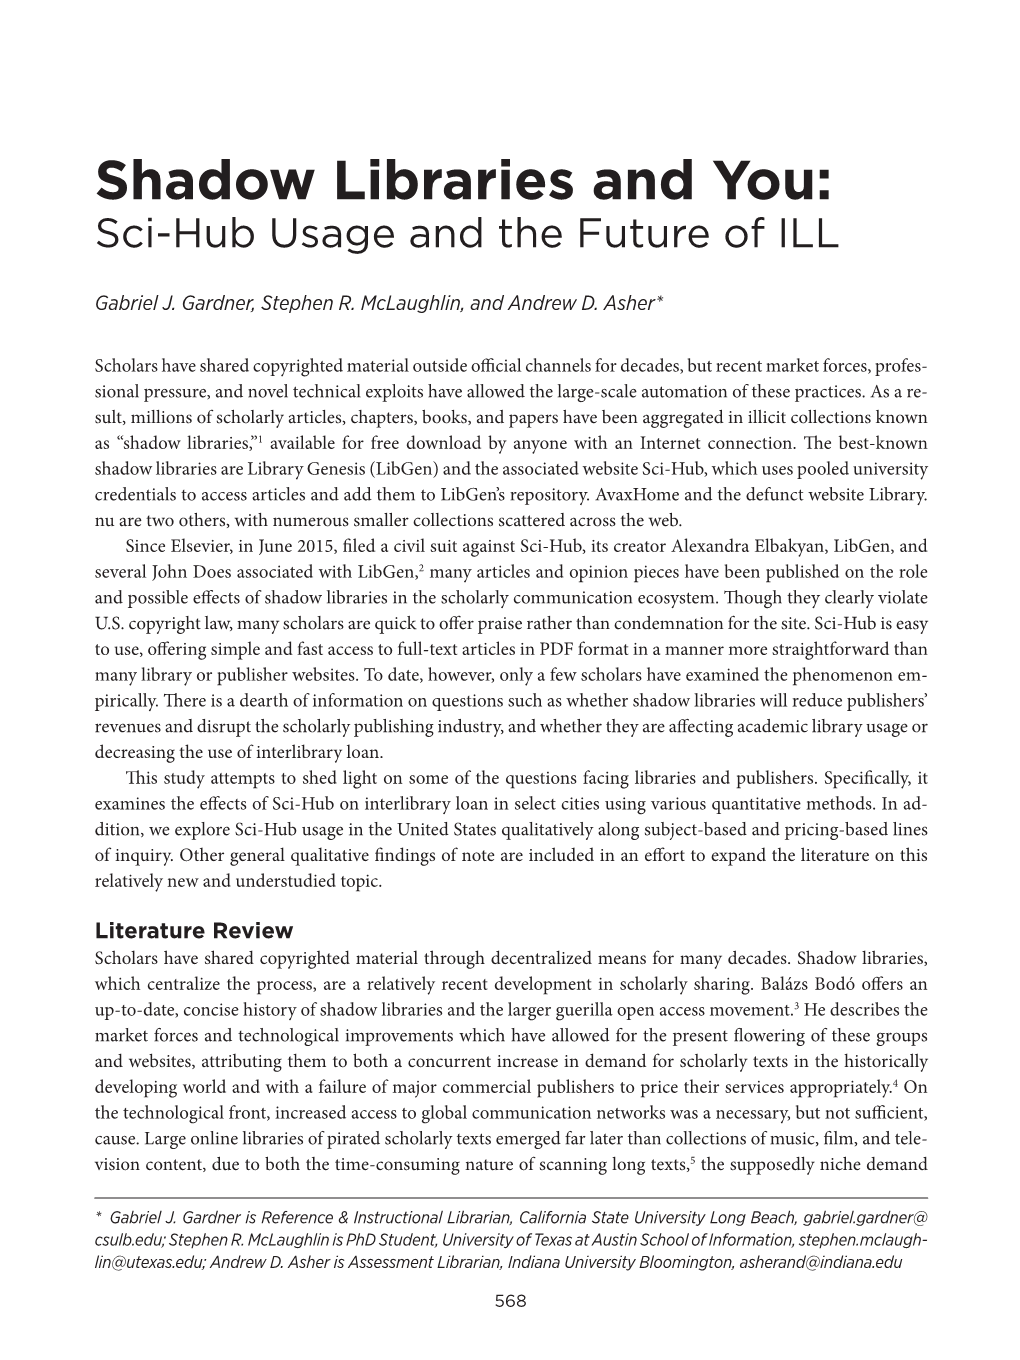 Shadow Libraries and You: Sci-Hub Usage and the Future of ILL